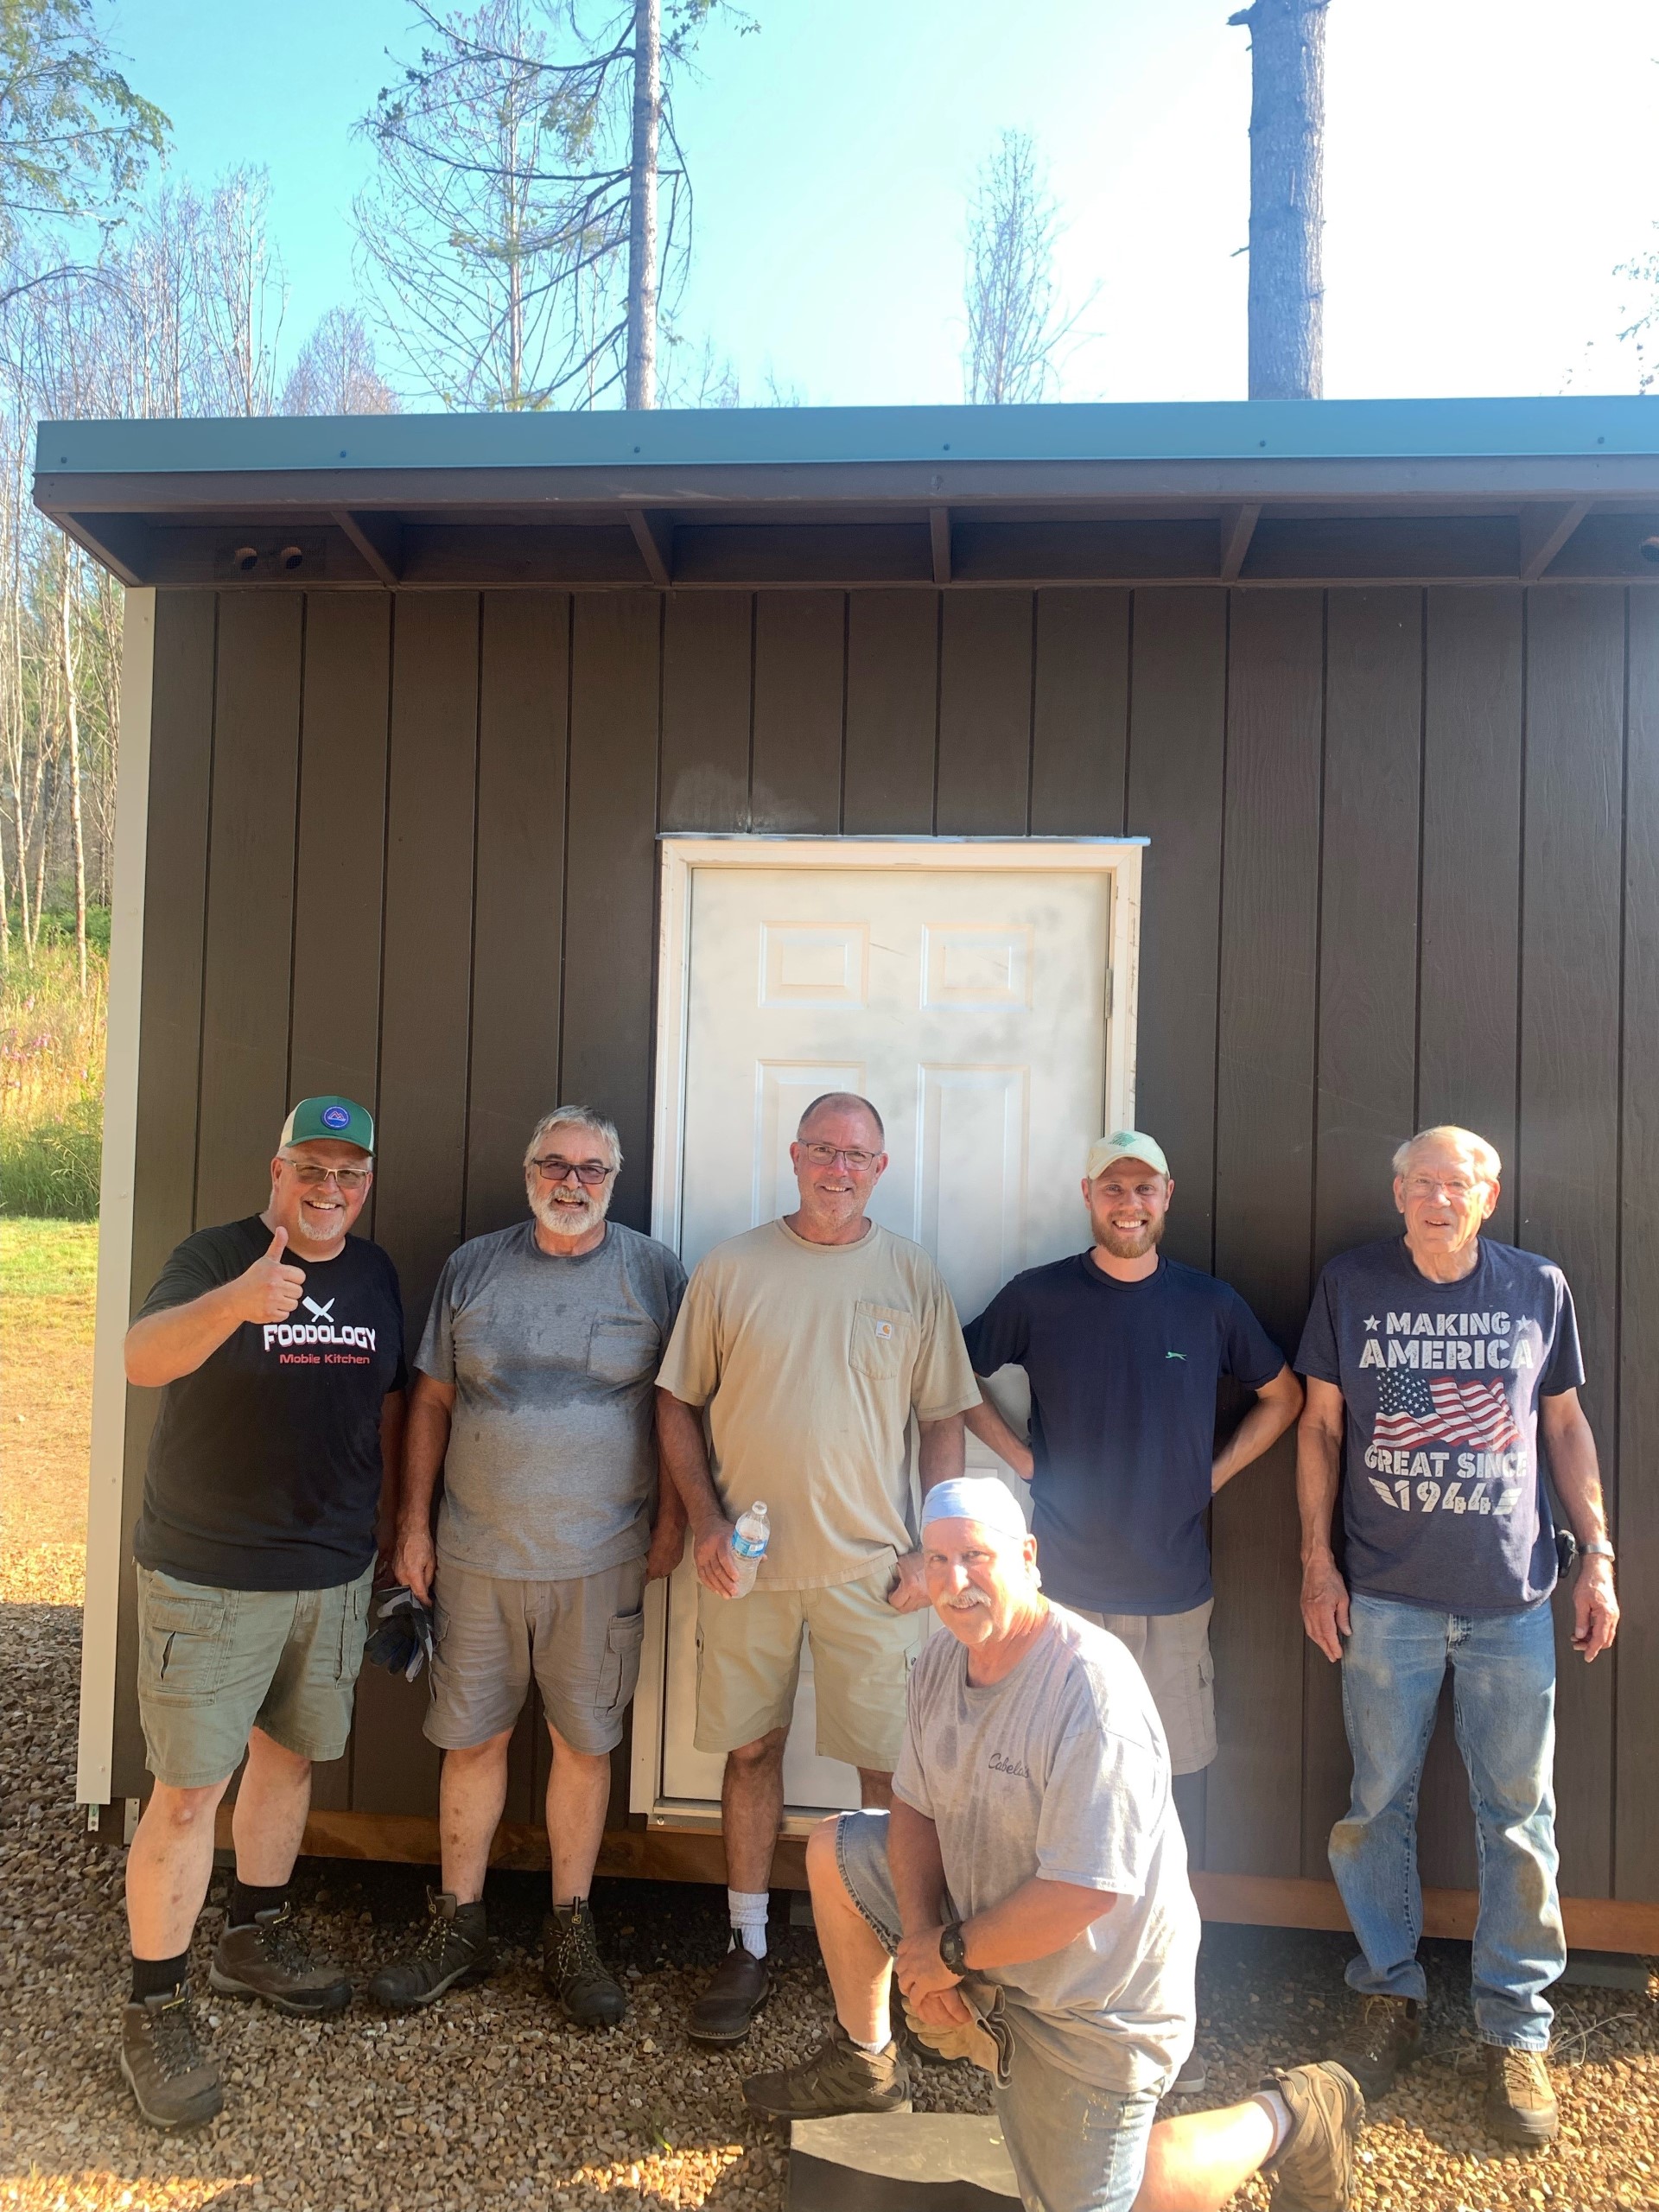 Volunteers take a moment to celebrate the completion of the 100th shed. The Santiam Canyon Shed project aims to erect at least 150 sheds for local residents waiting to reconstruct their fire-damaged homes.